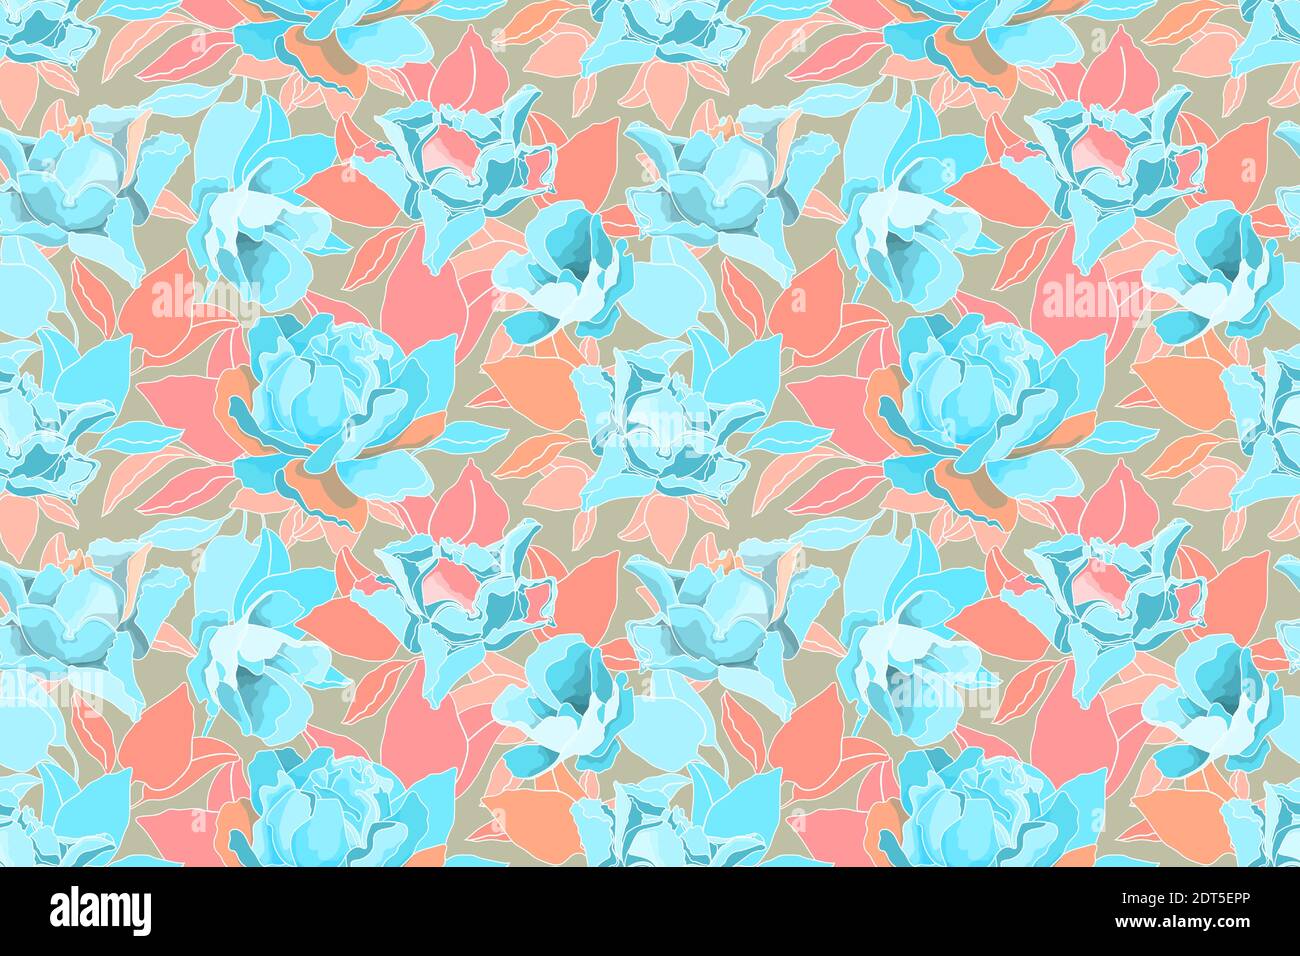 Vector floral seamless pattern. Blue roses, pink, orange and blue leaves Stock Vector